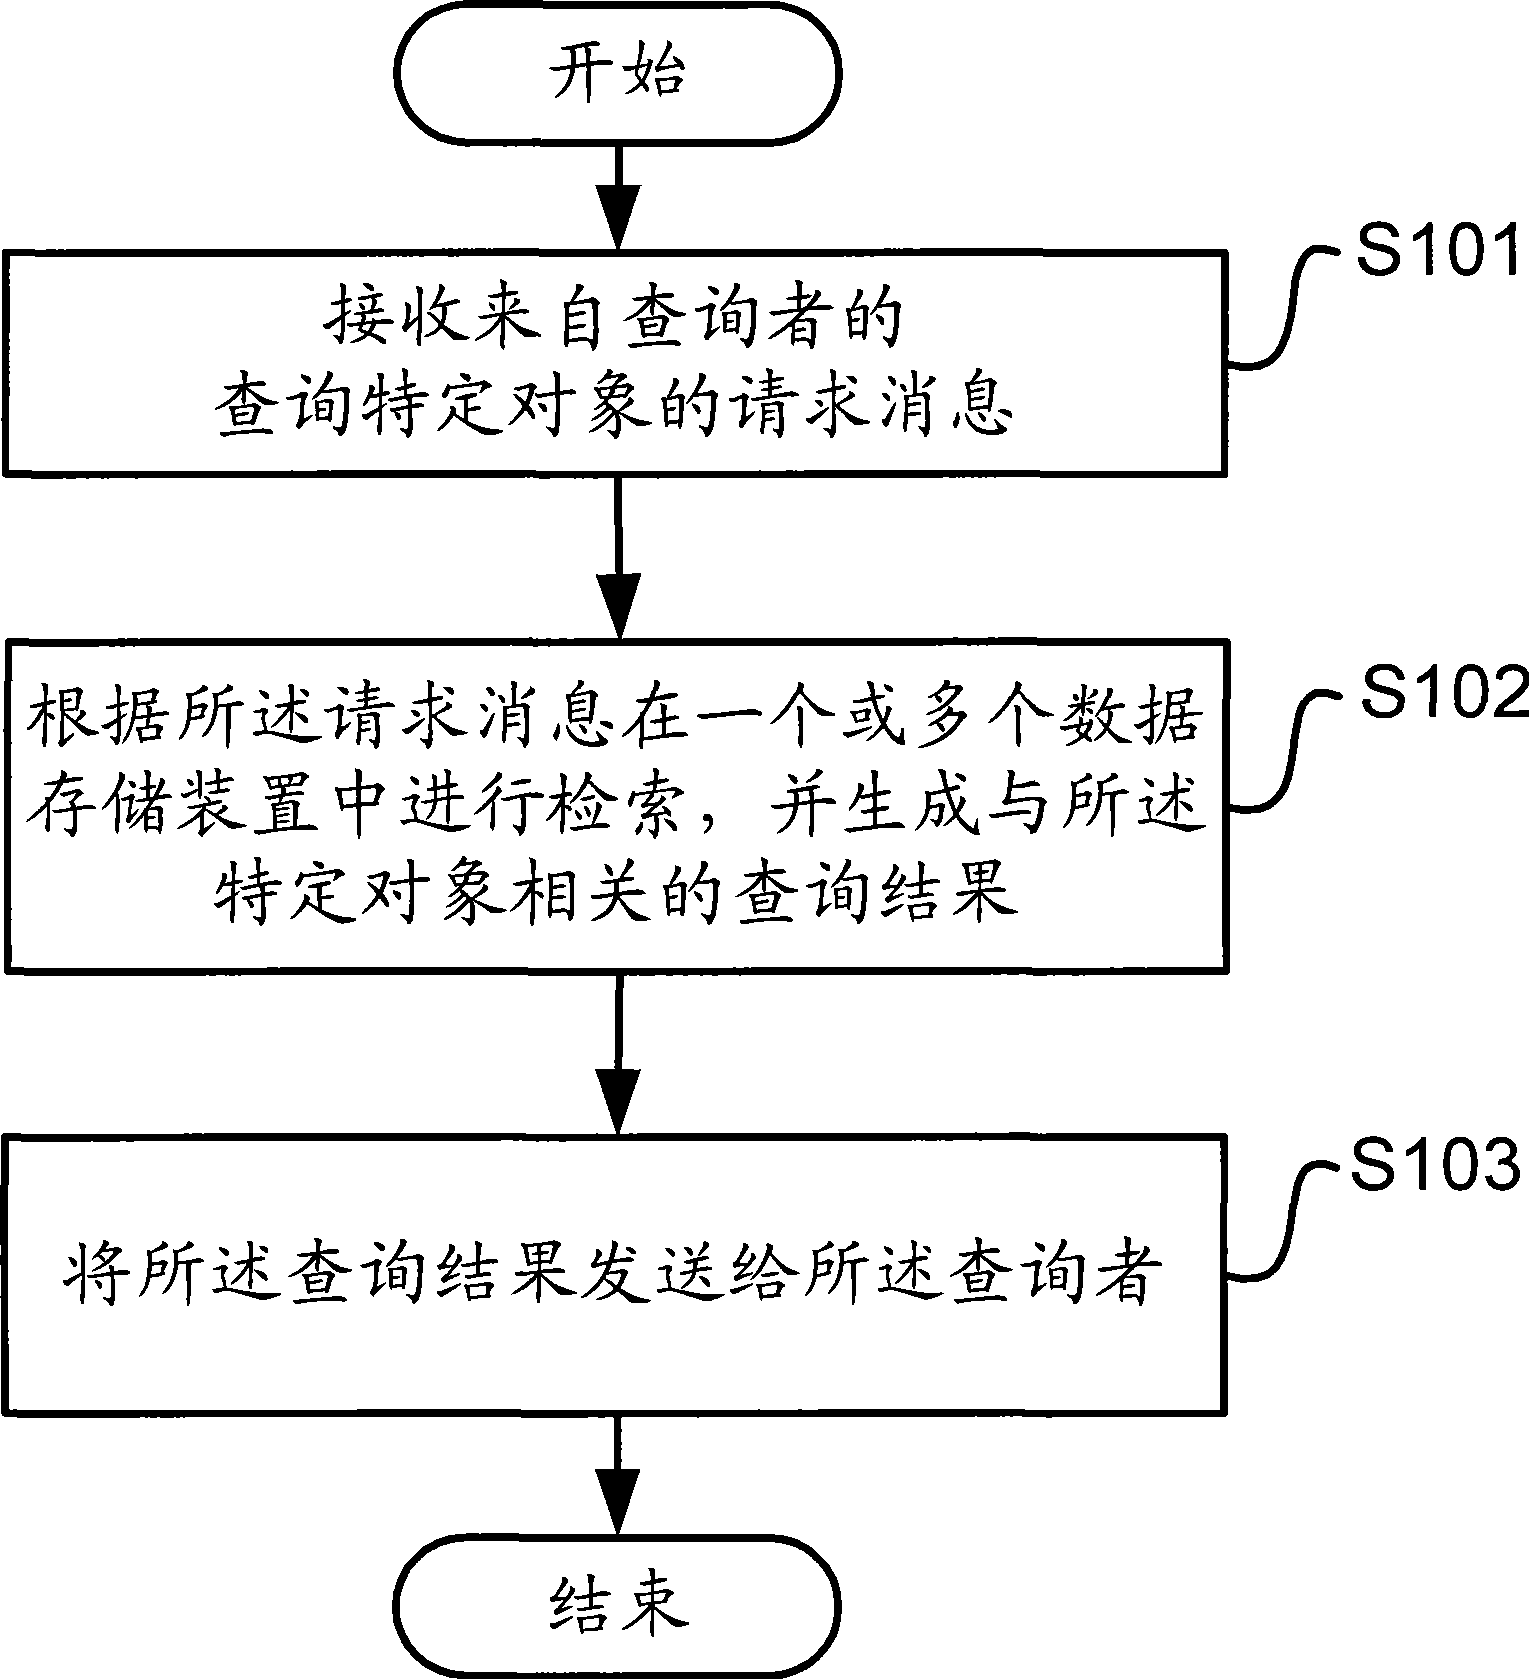 System and method for pre-analyzing according to relationship between metadata and data object